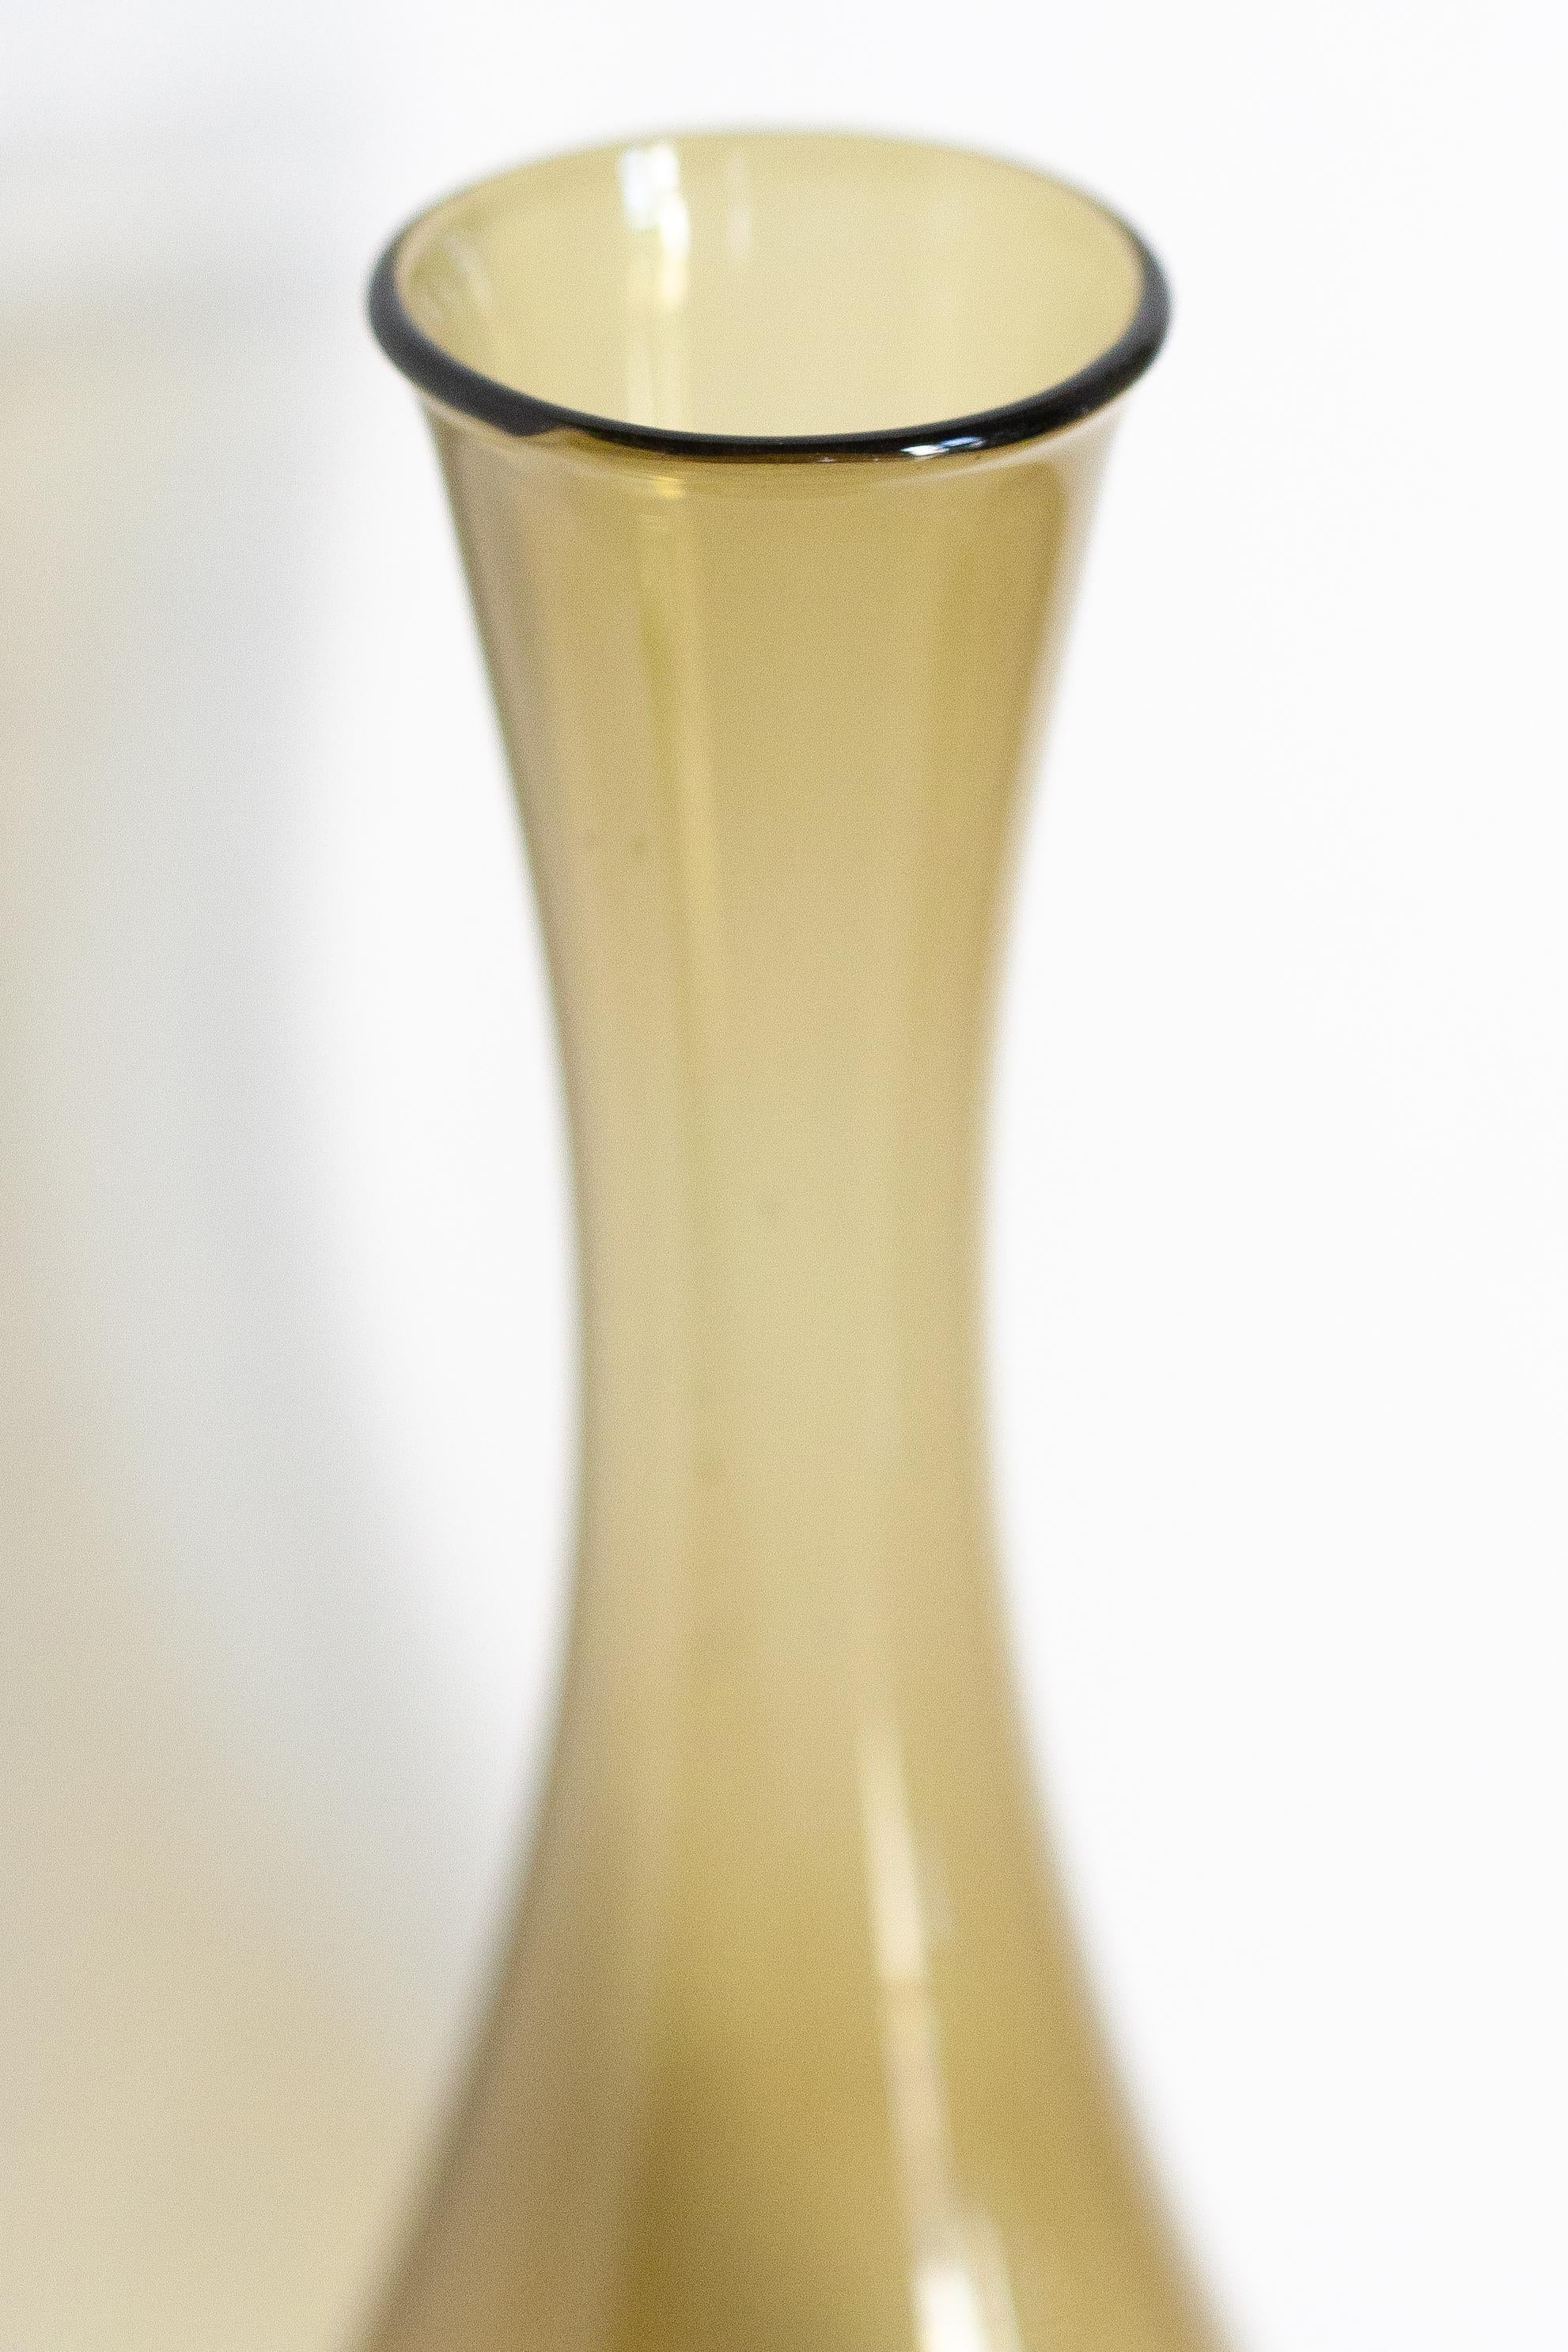 Mid Century Small Beige Brown Decorative Glass Vase, Europe, 1960s For Sale 2